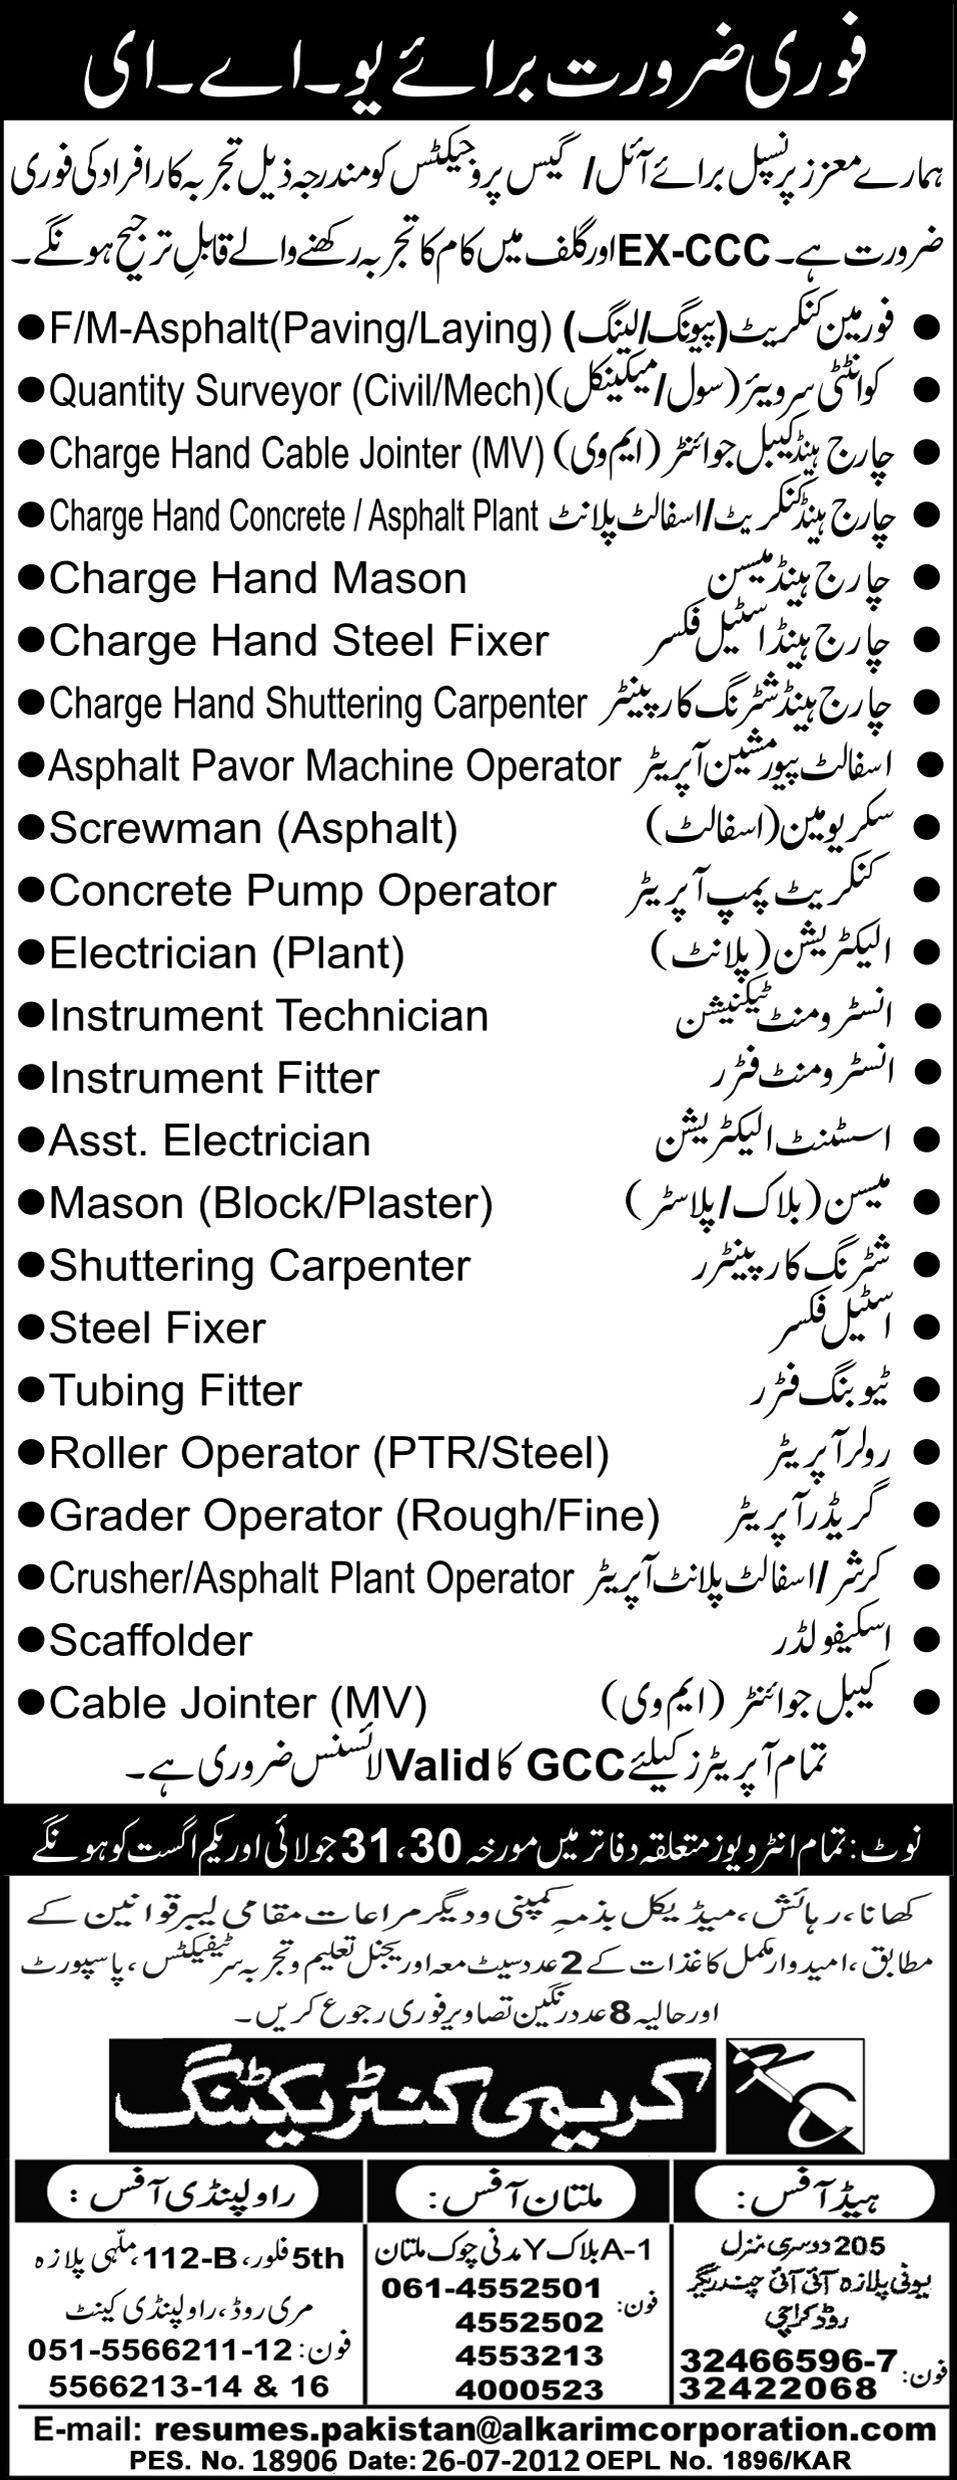 Oil and Gas Project Staff Required for UAE